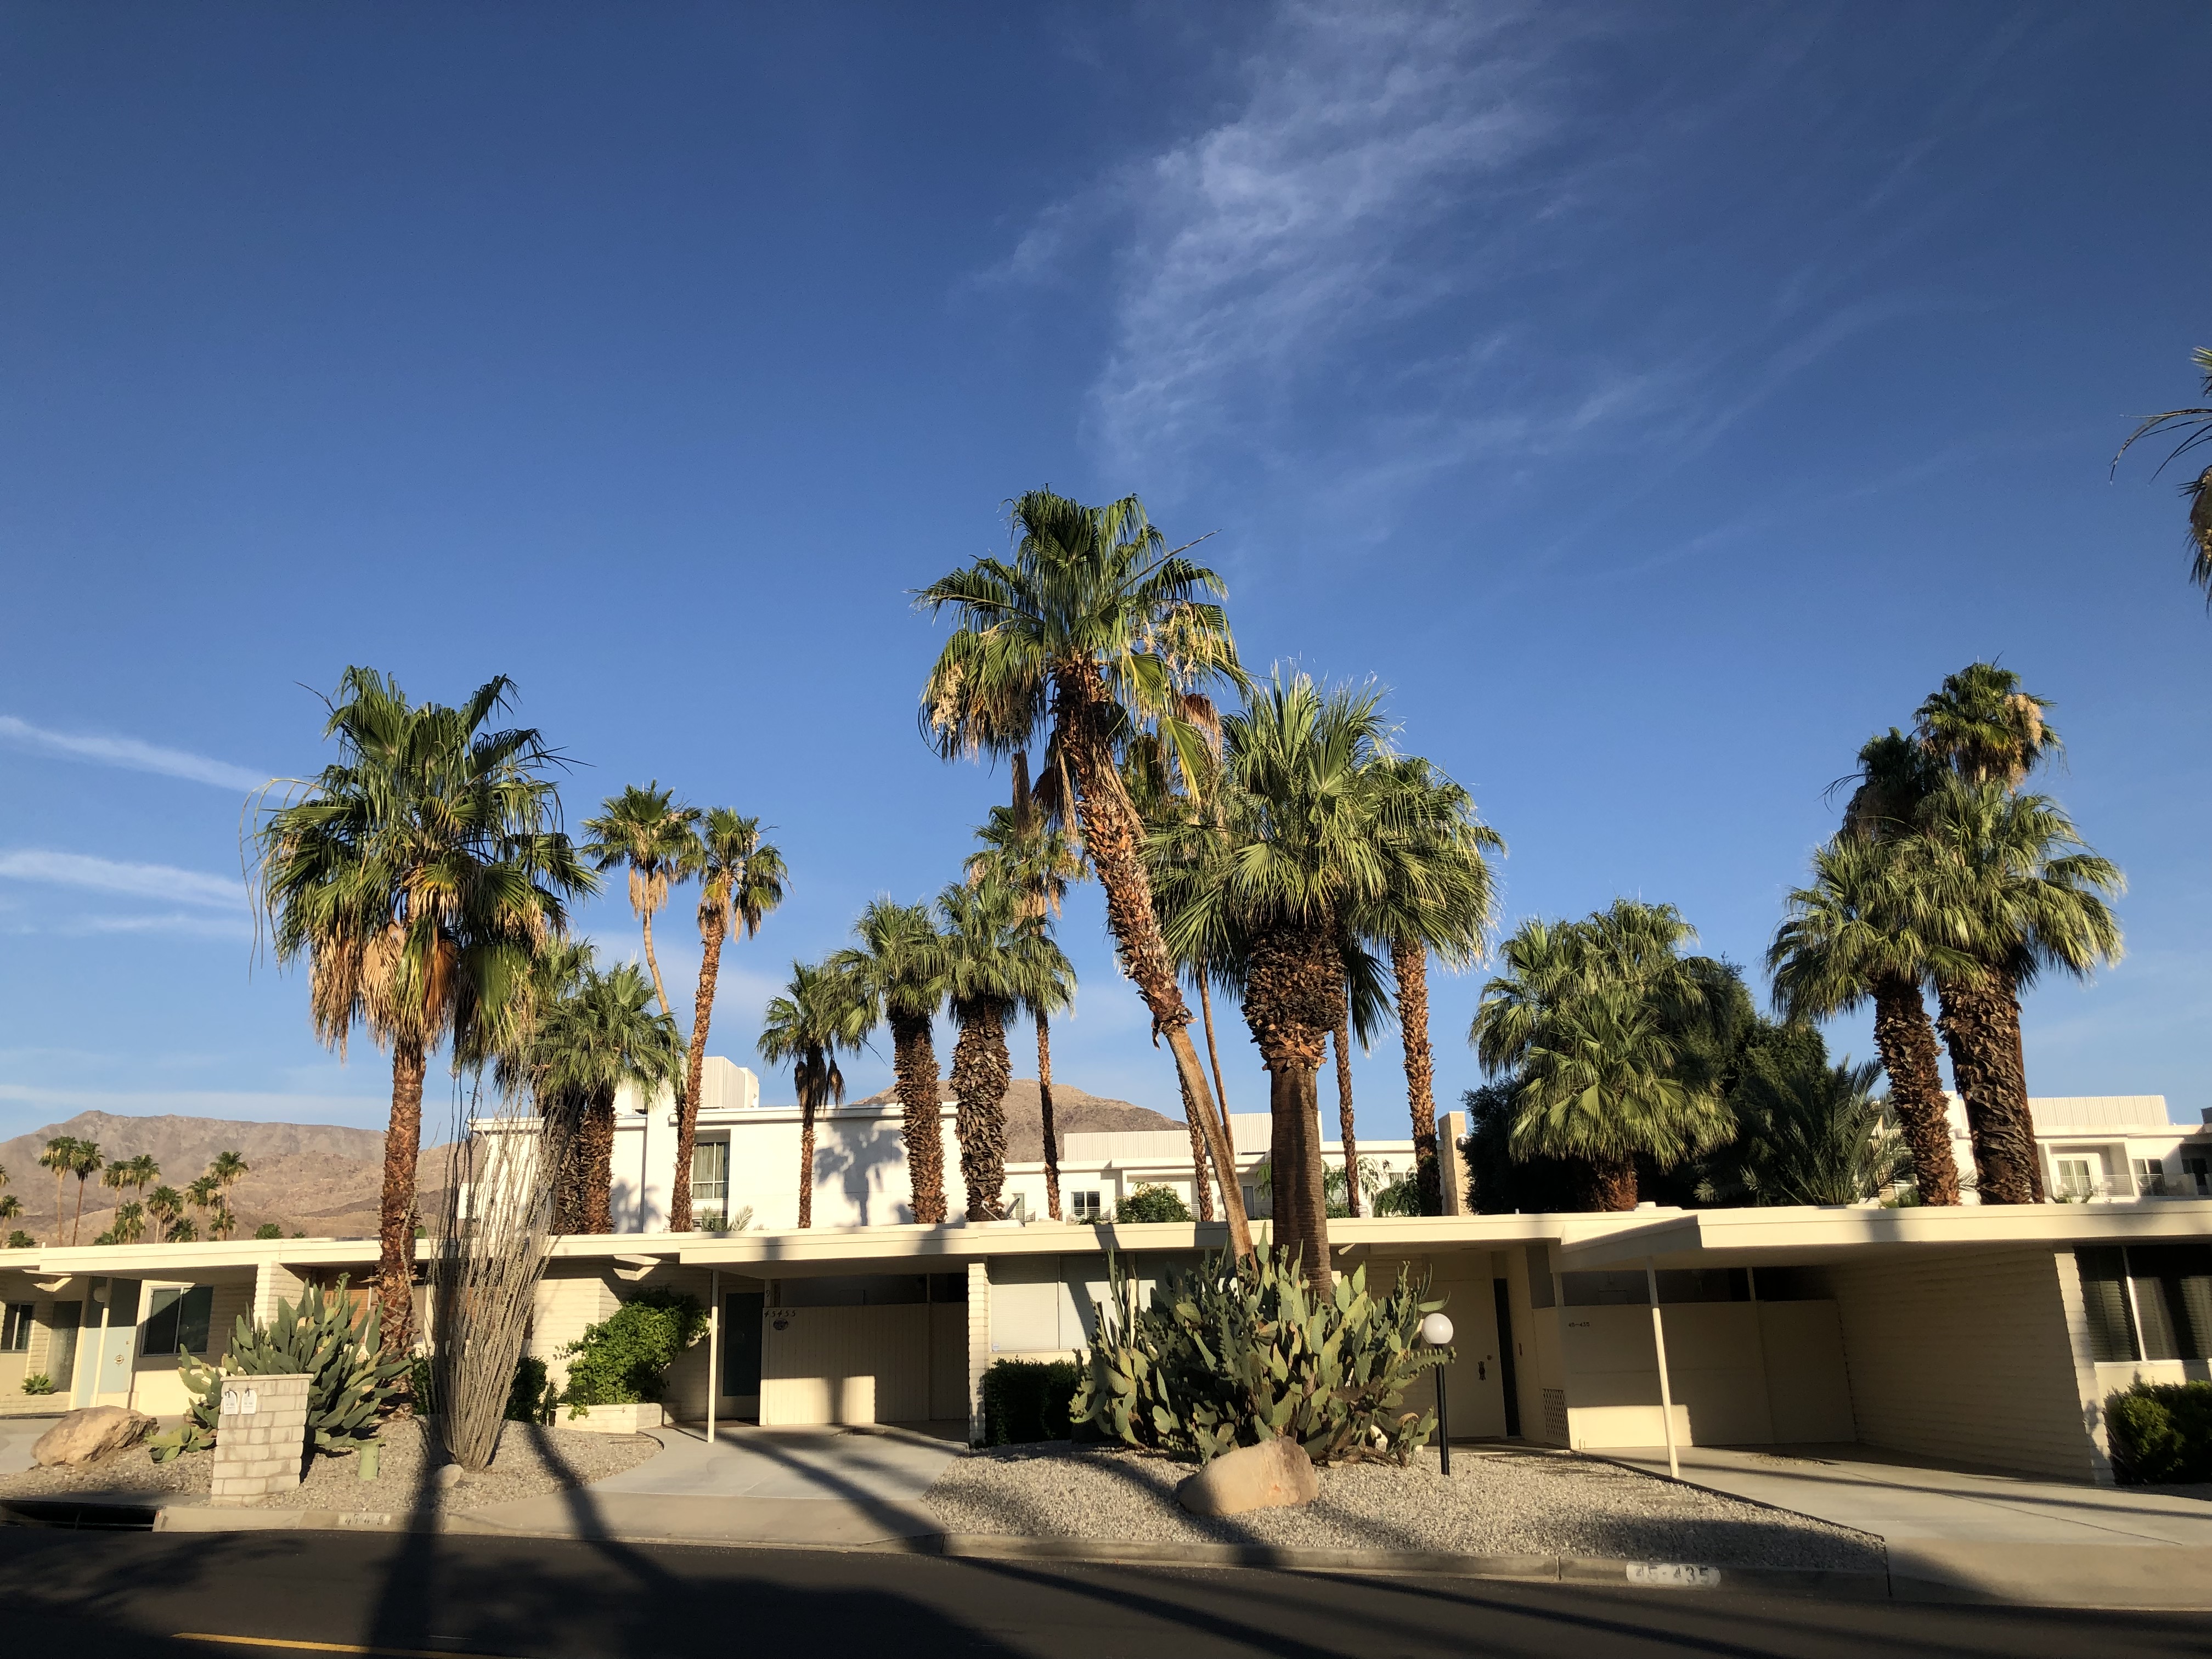 Top Five Things To Do In Palm Springs, California